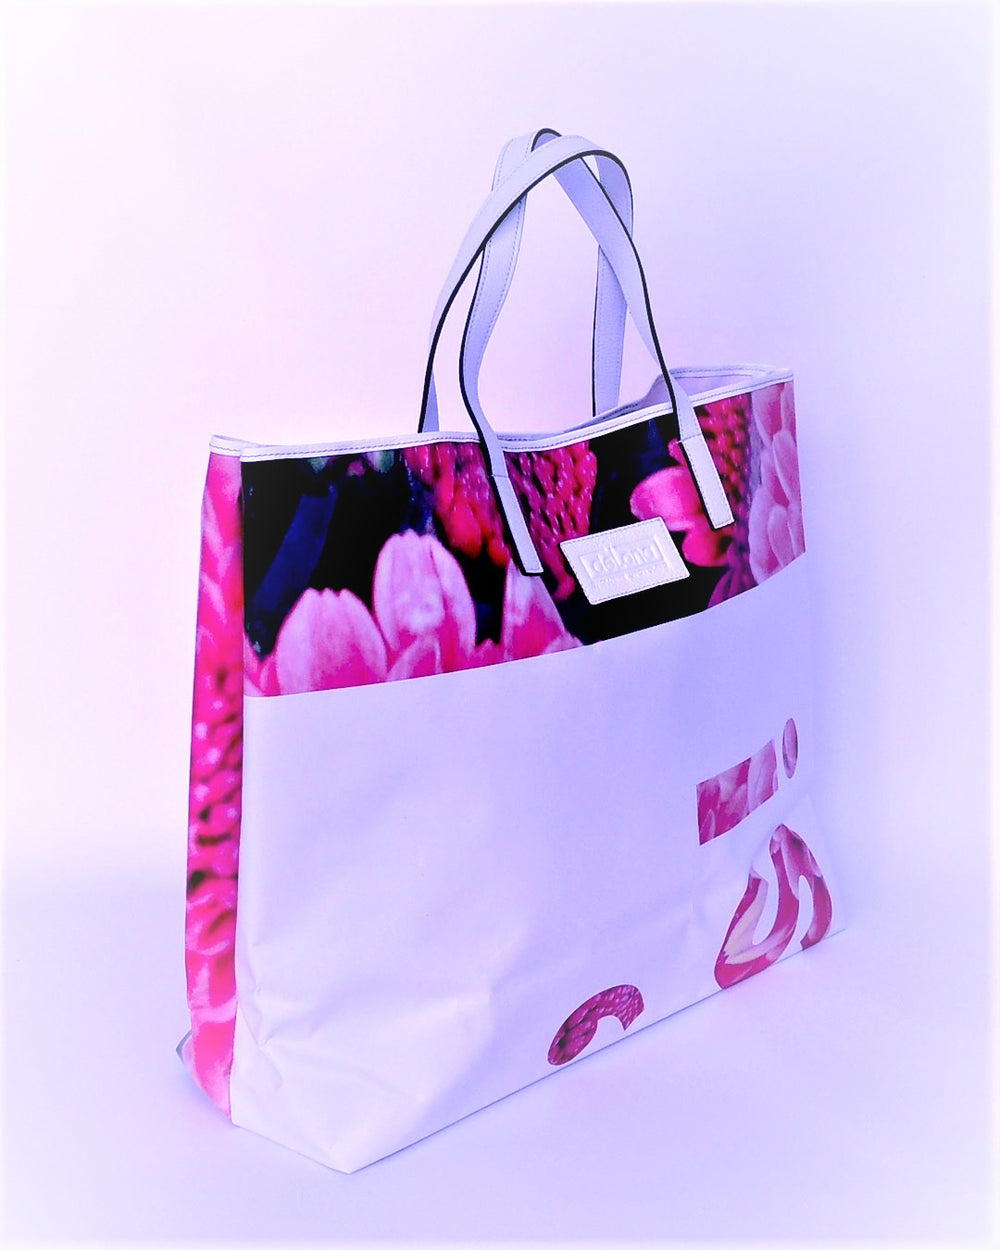 TOTE BAG: Style and functionality with our shopper bags made from advertising banners